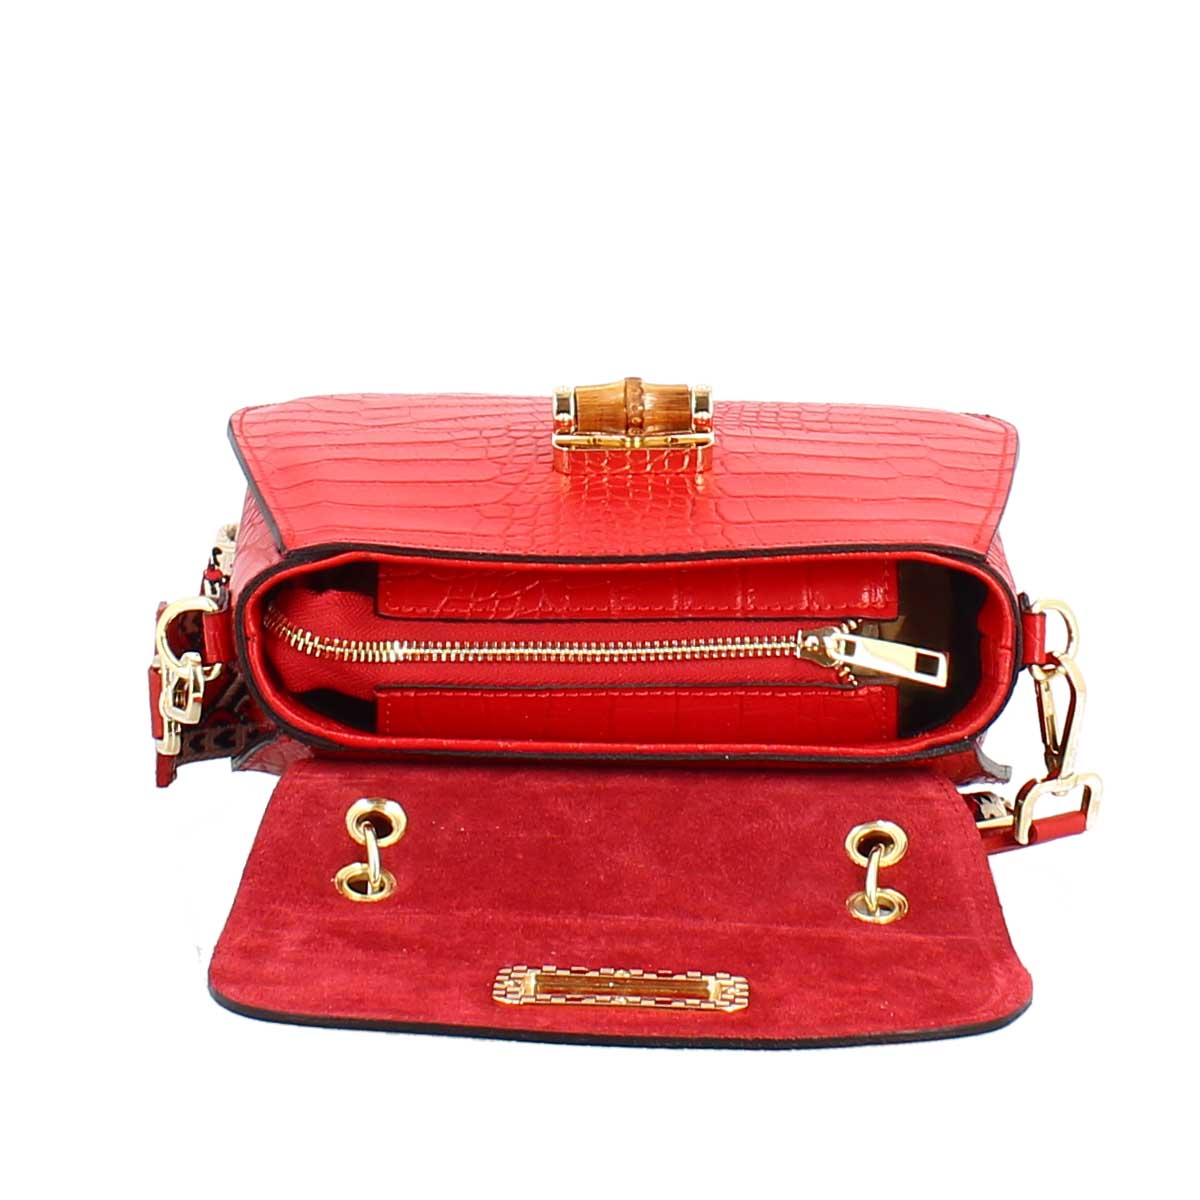 Handmade women's handbag in red leather with removable shoulder strap